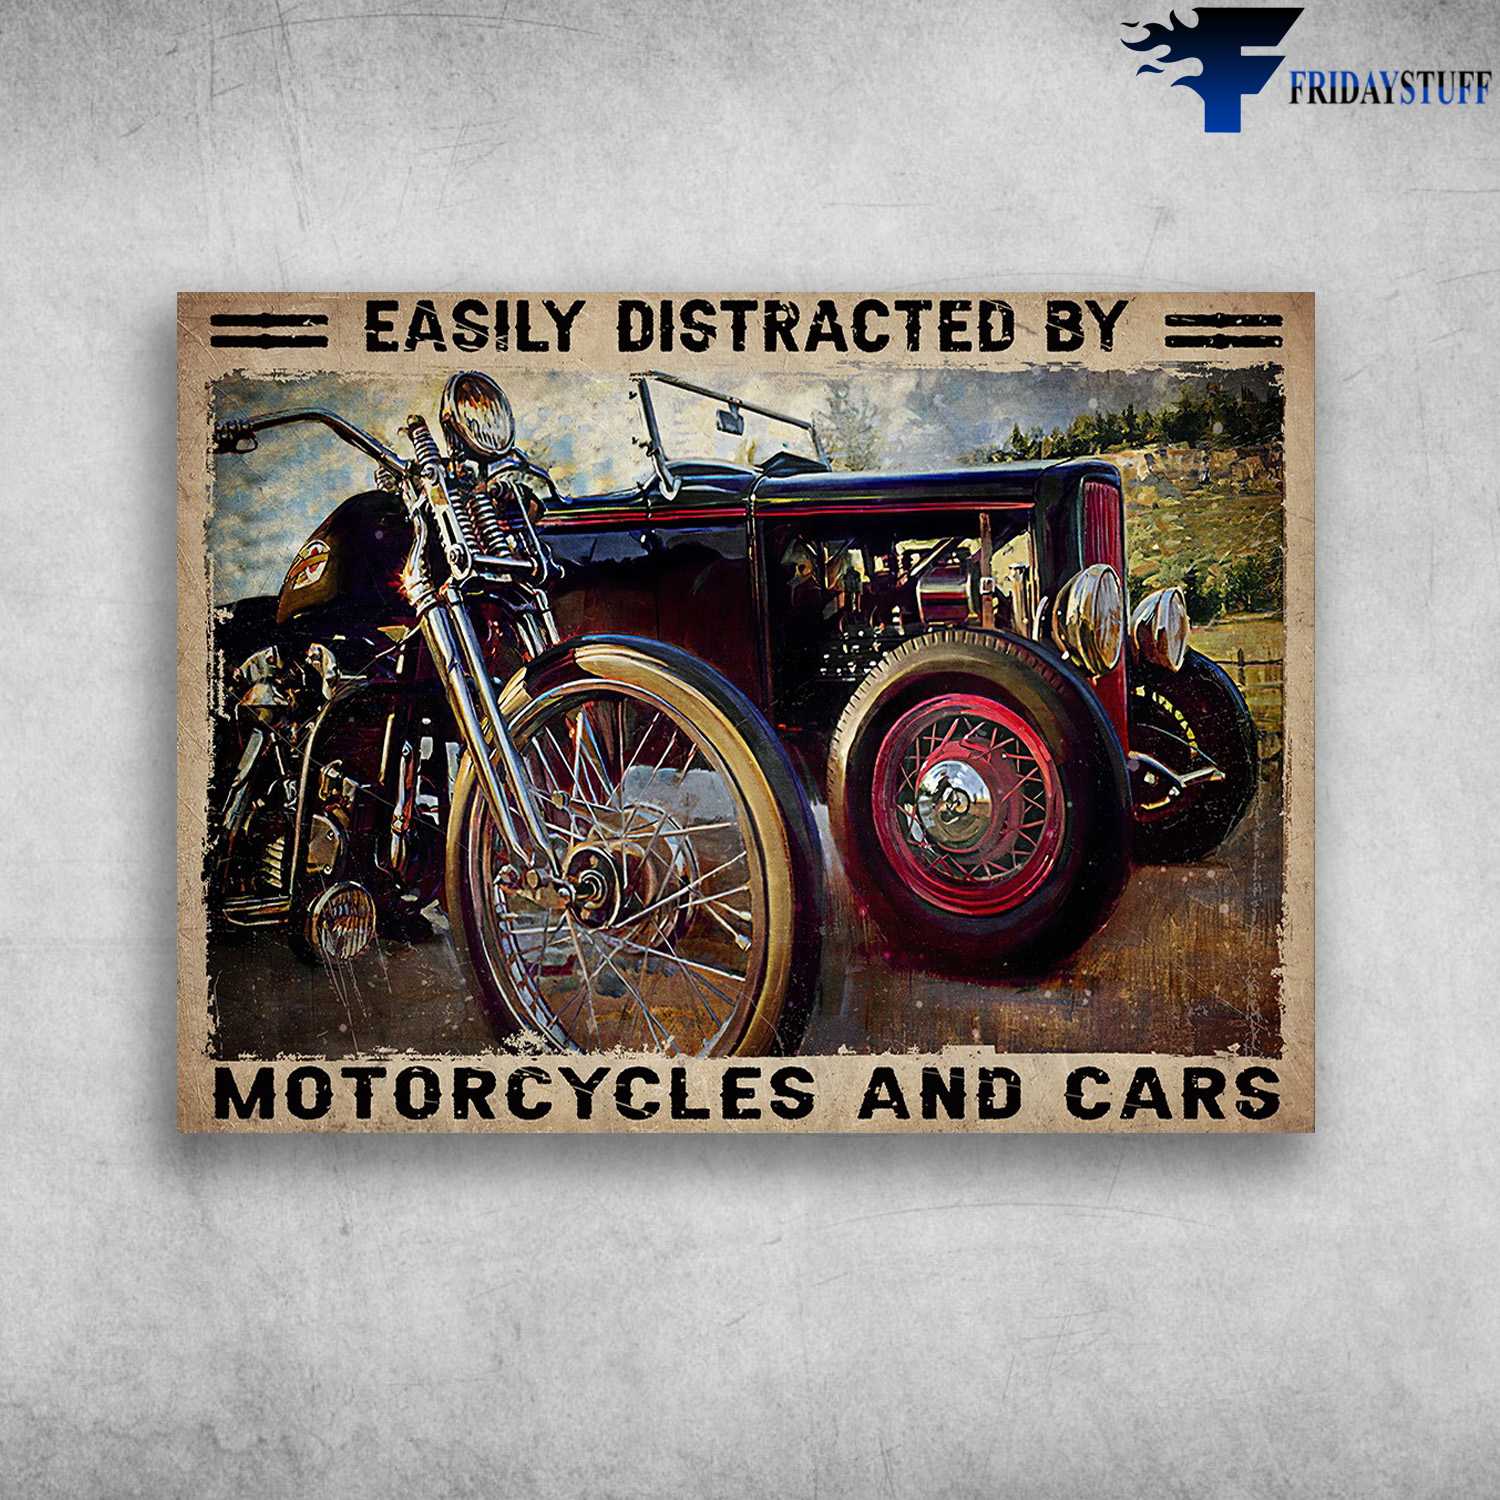 Hot Rod Motorcycles, Biker Lover - Easily Distracted By, Motorcycles And Cars